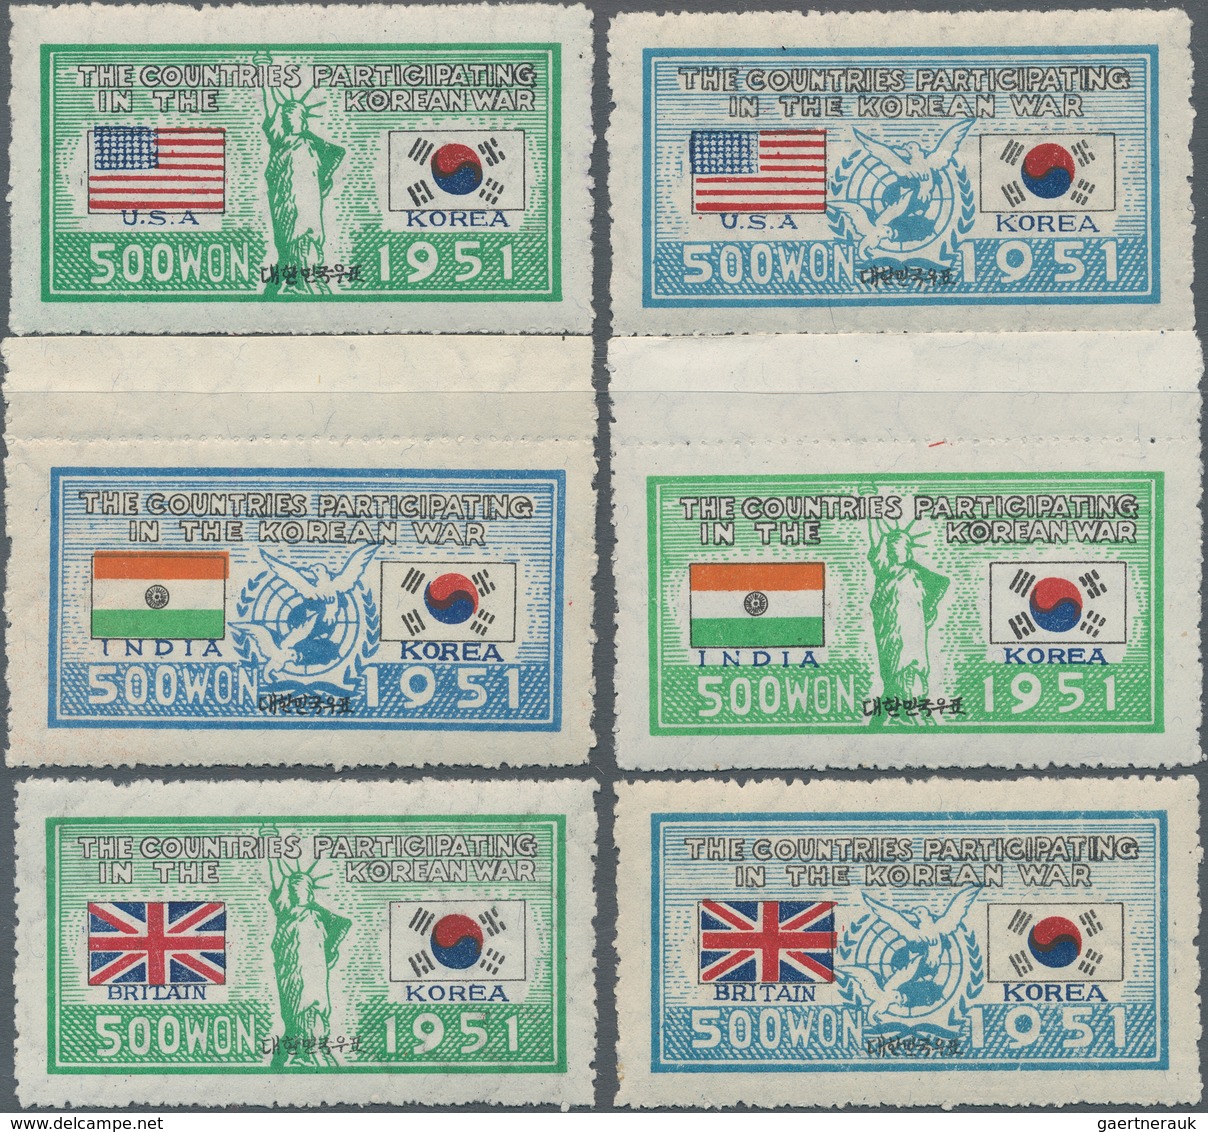 Korea-Süd: 1951, flag set of 44 vals. inc. Italy both old and new flag, mint never hinged MNH, 4 set